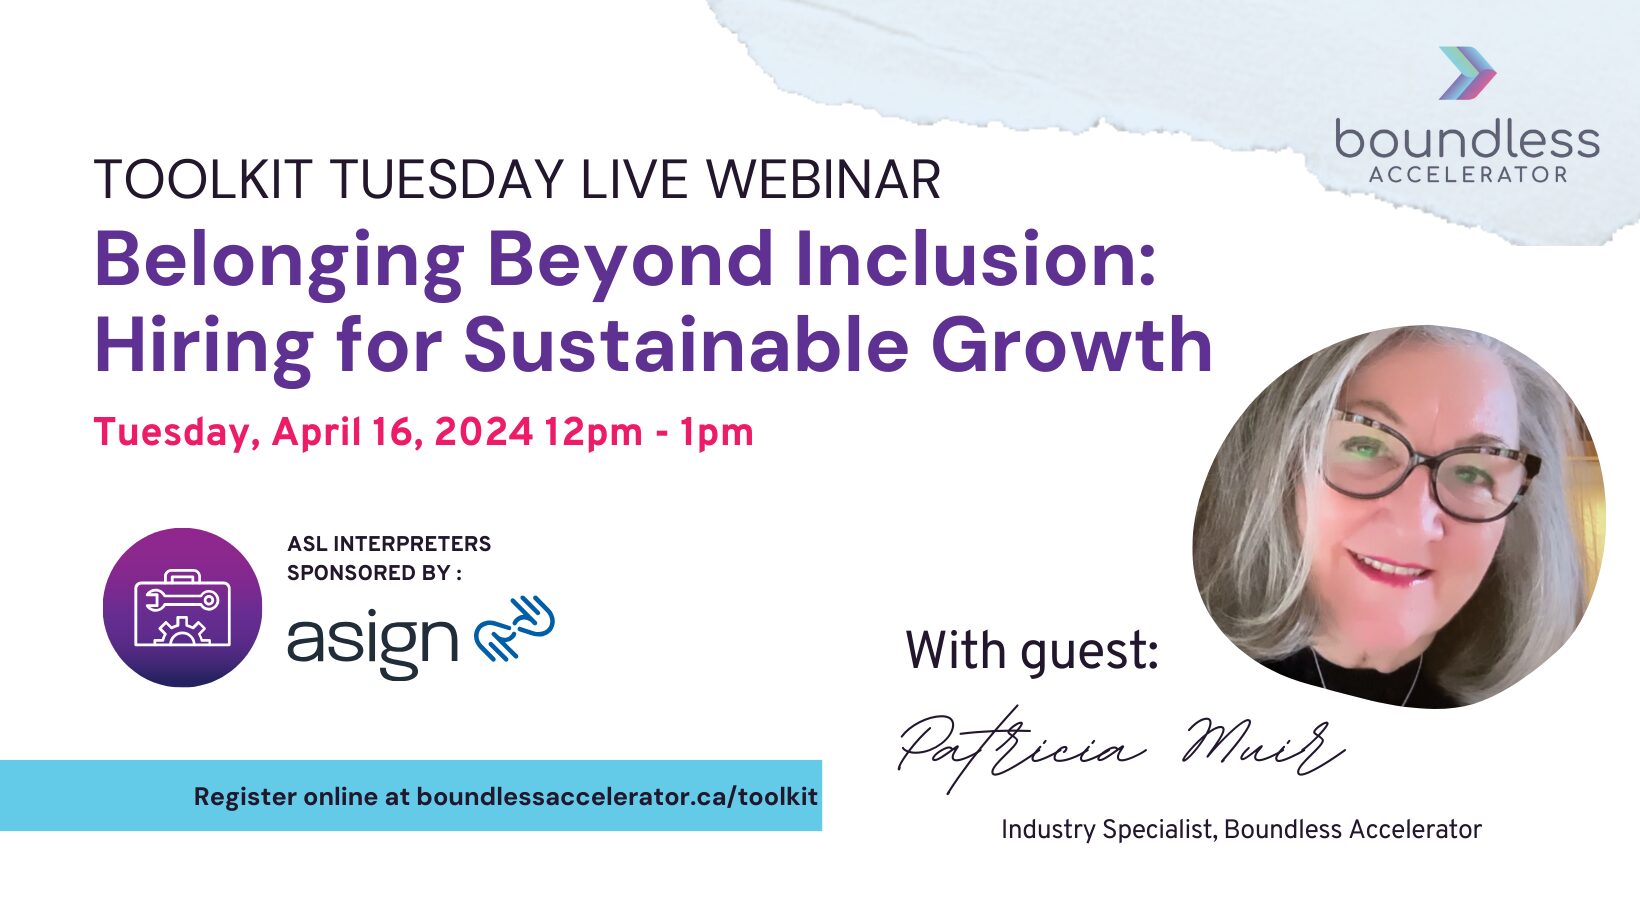 Toolkit Tuesday Live Webinar — Belonging Beyond Inclusion: Hiring for Sustainable Growth